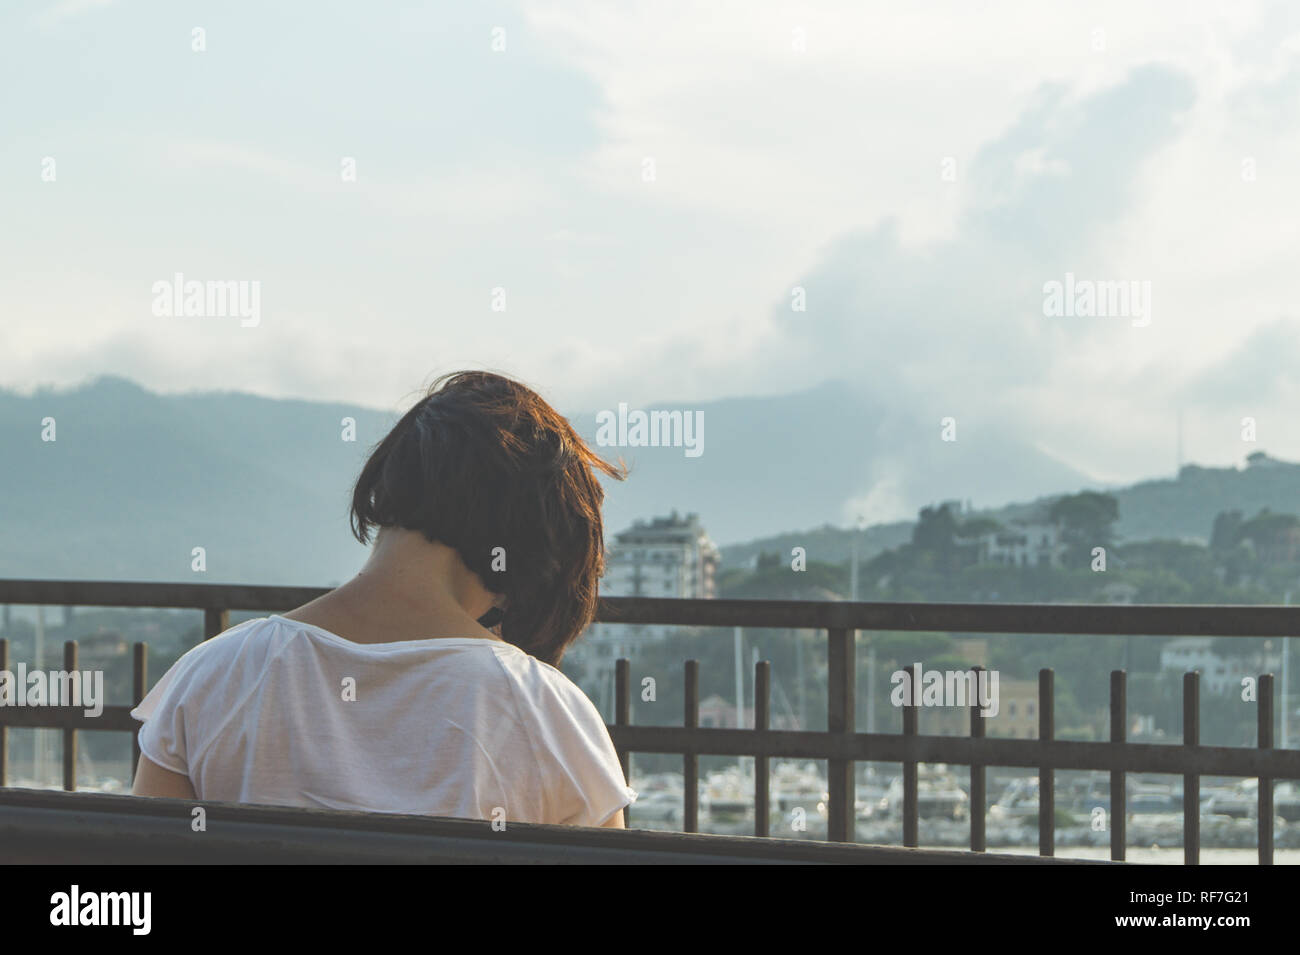 rear view of a woman tilting her head while sitting on a bench in front of scenery Stock Photo